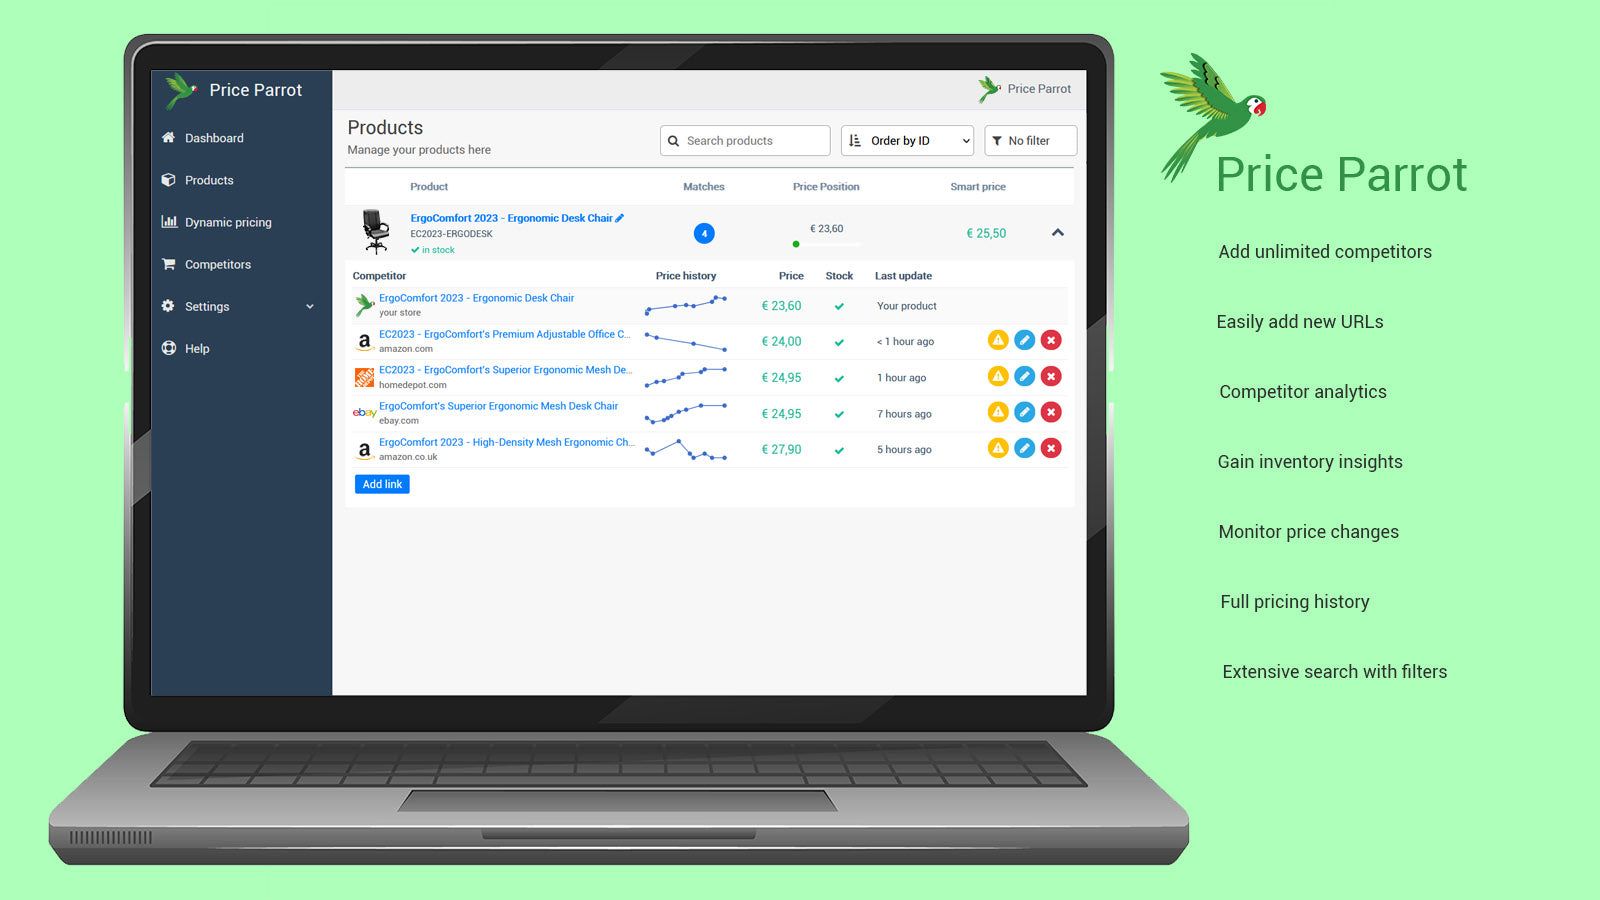 Extensive product management with Price Parrot